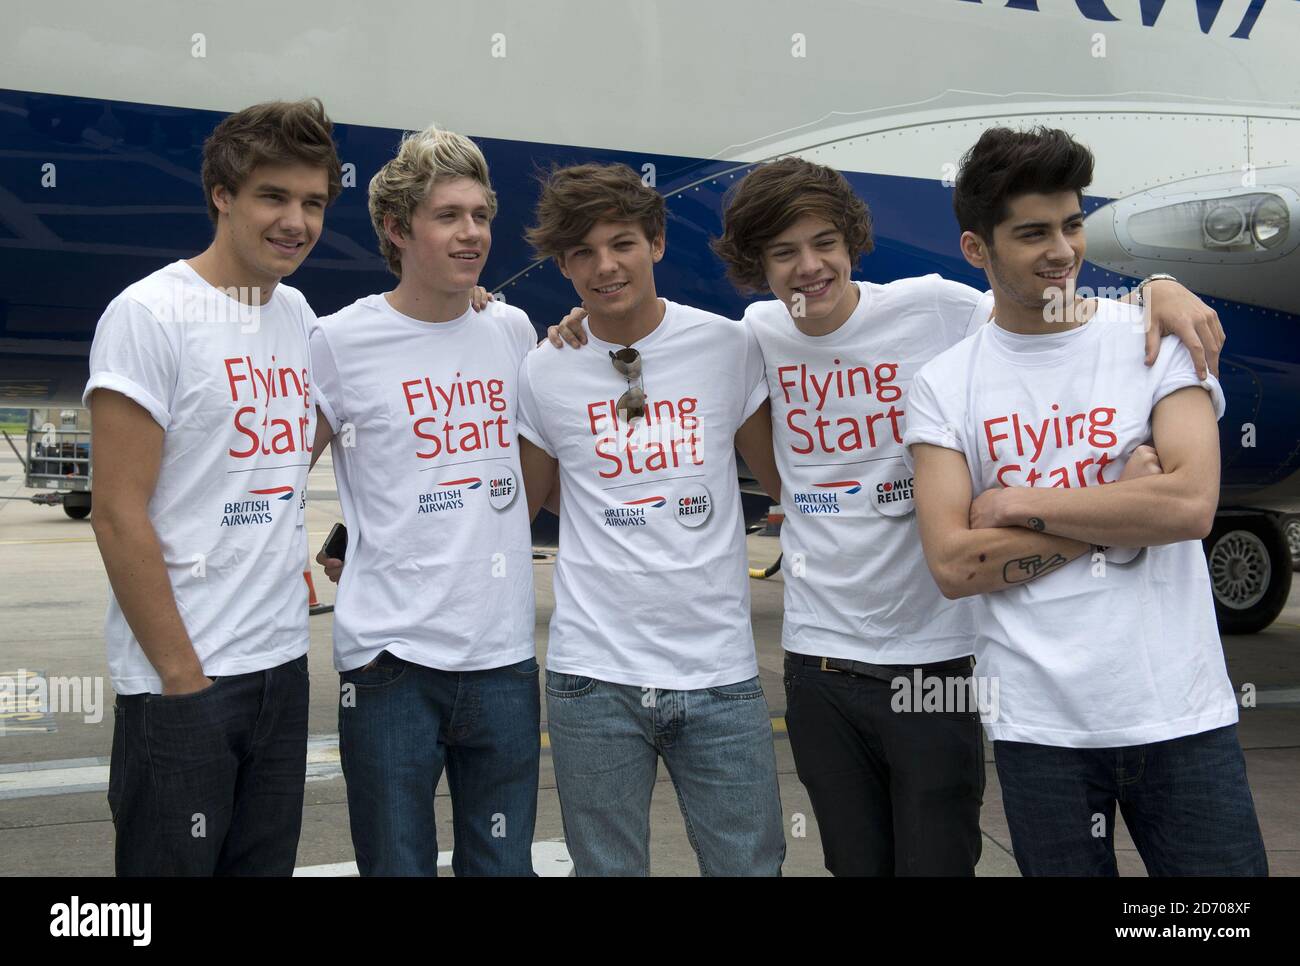 One Direction L R Liam Payne Niall Horan Louis Tomlinson Harry Styles And Zayn Malik Pictured Next To Flight Ba1d A Private Charter Flight From London To Manchester Hosted By The Band